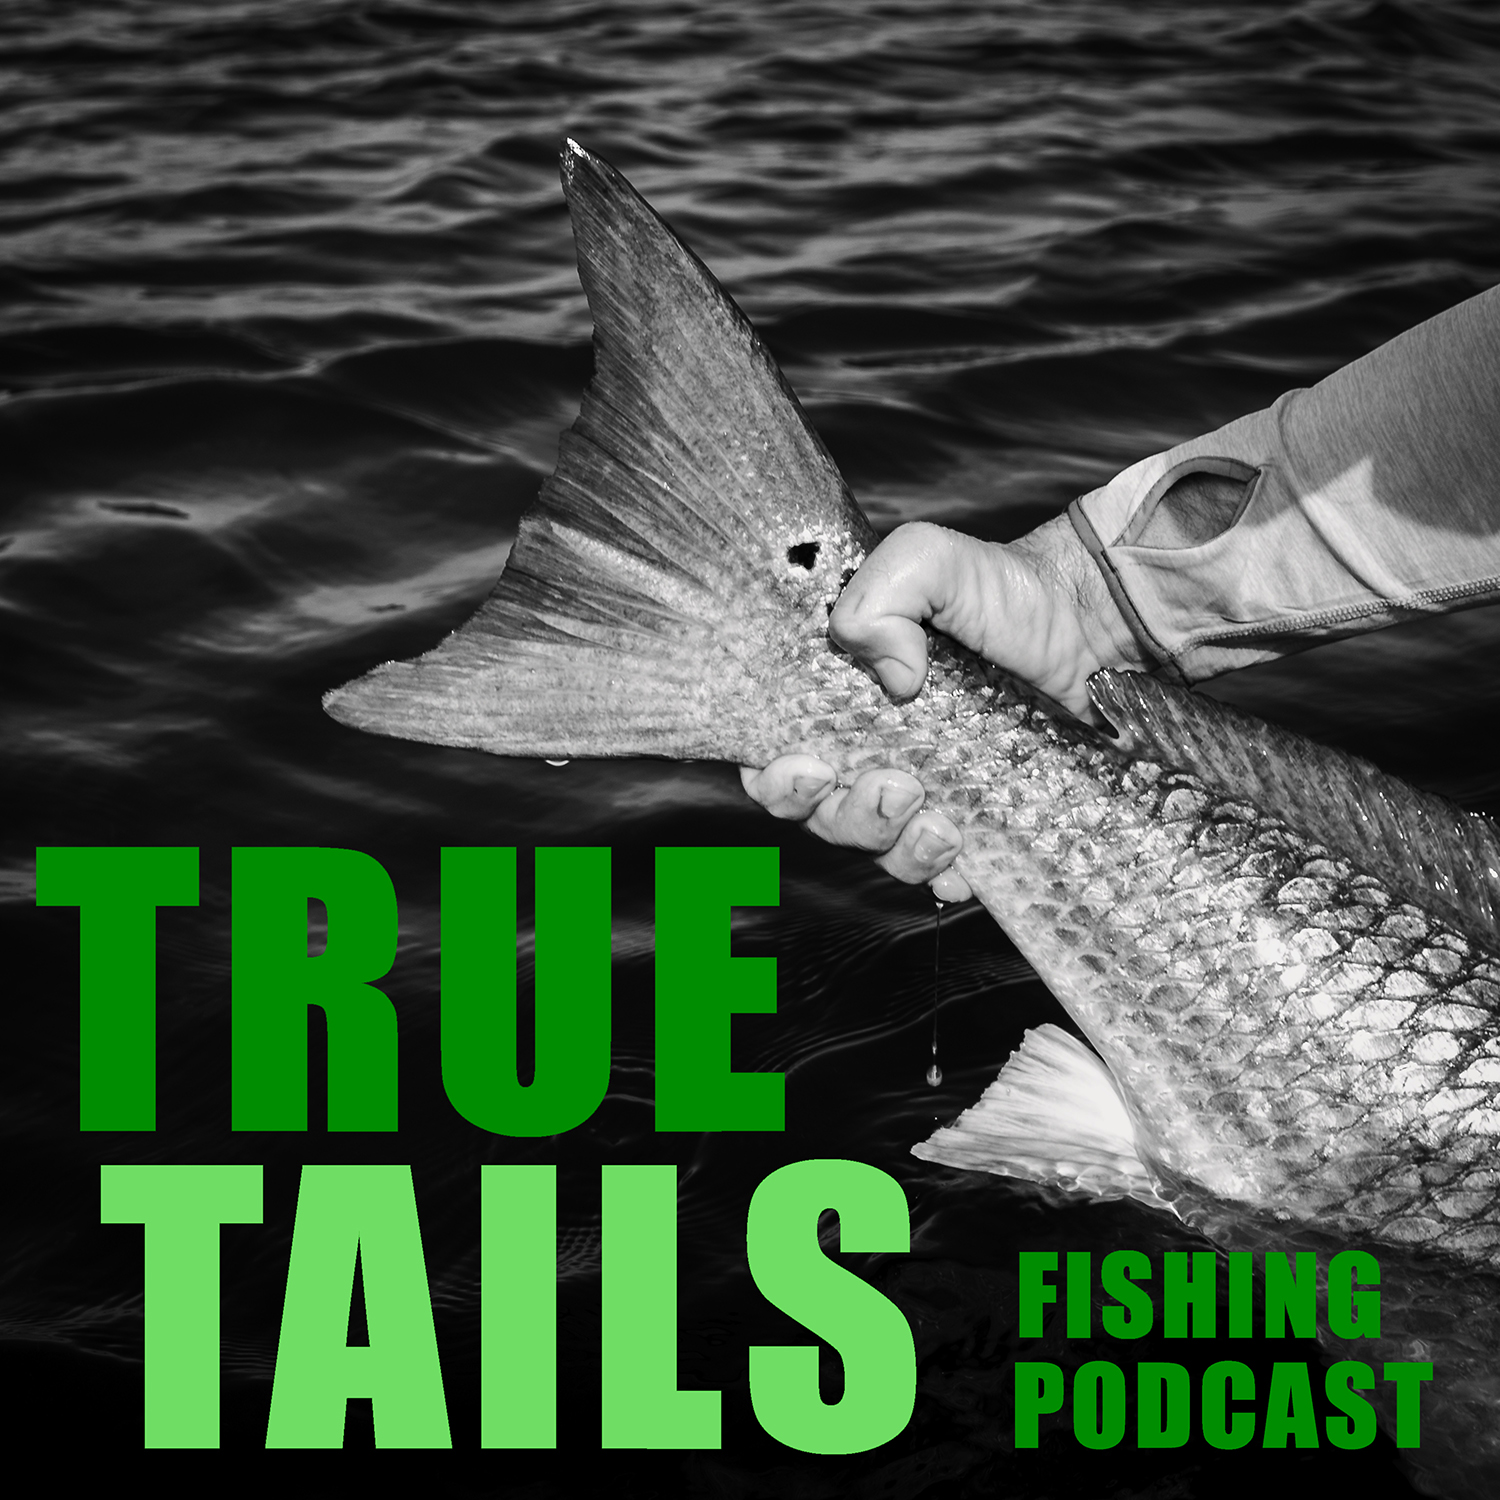 Artwork for podcast True Tails Fishing Podcast